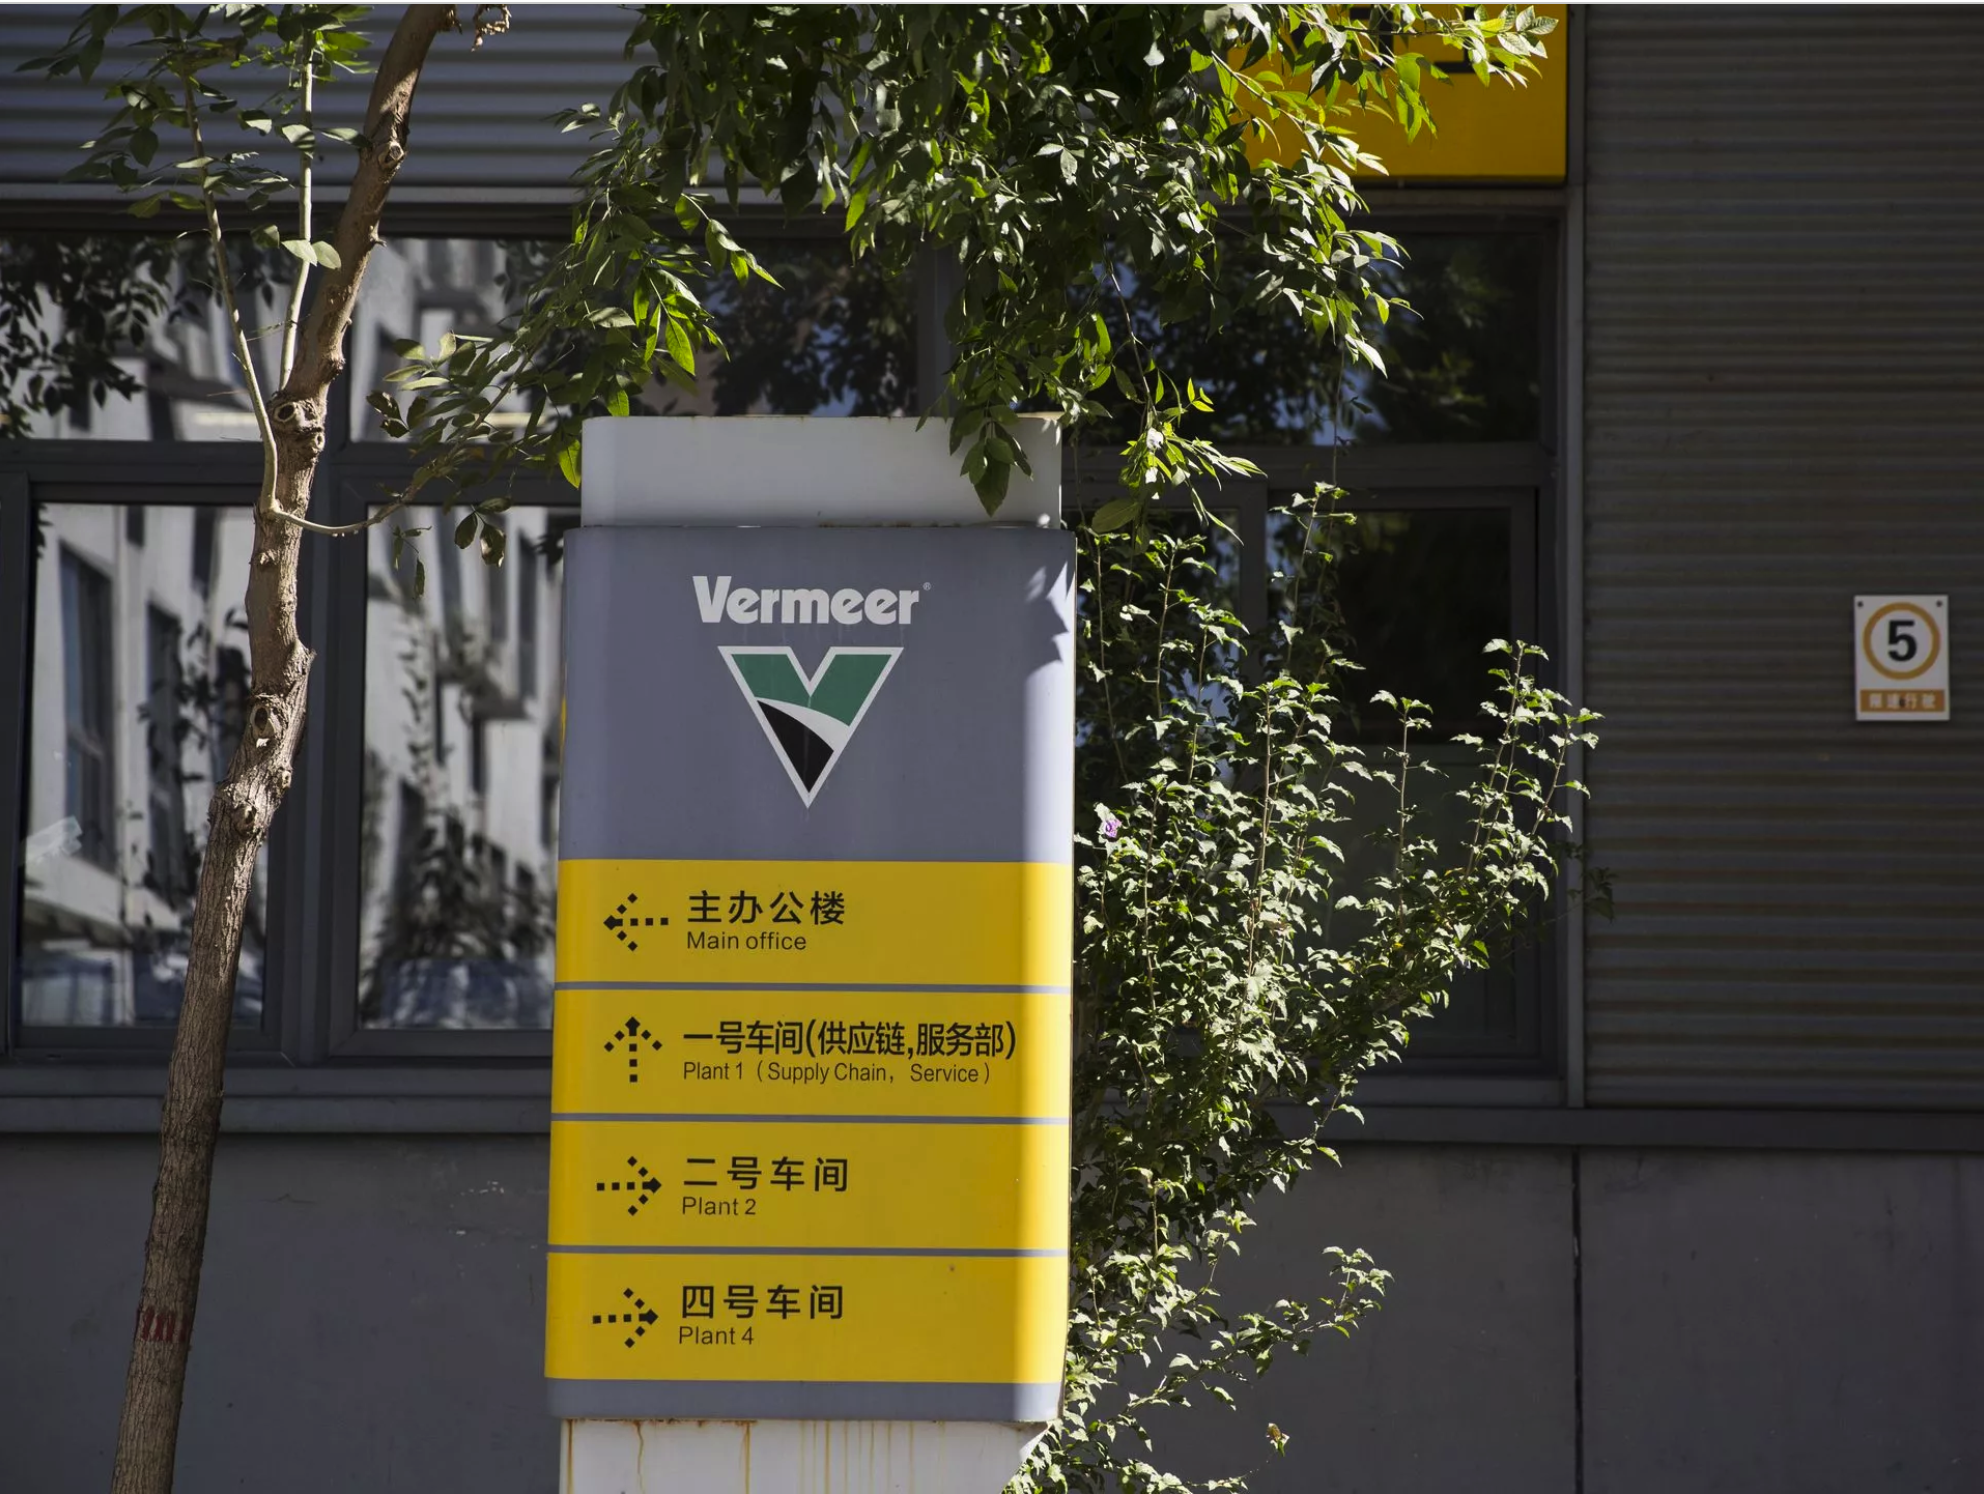 Vermeer, a company based in Pella, Iowa, is also doing international business and manufacturing some of its products in China. Image by Kelsey Kremer. China, 2017.